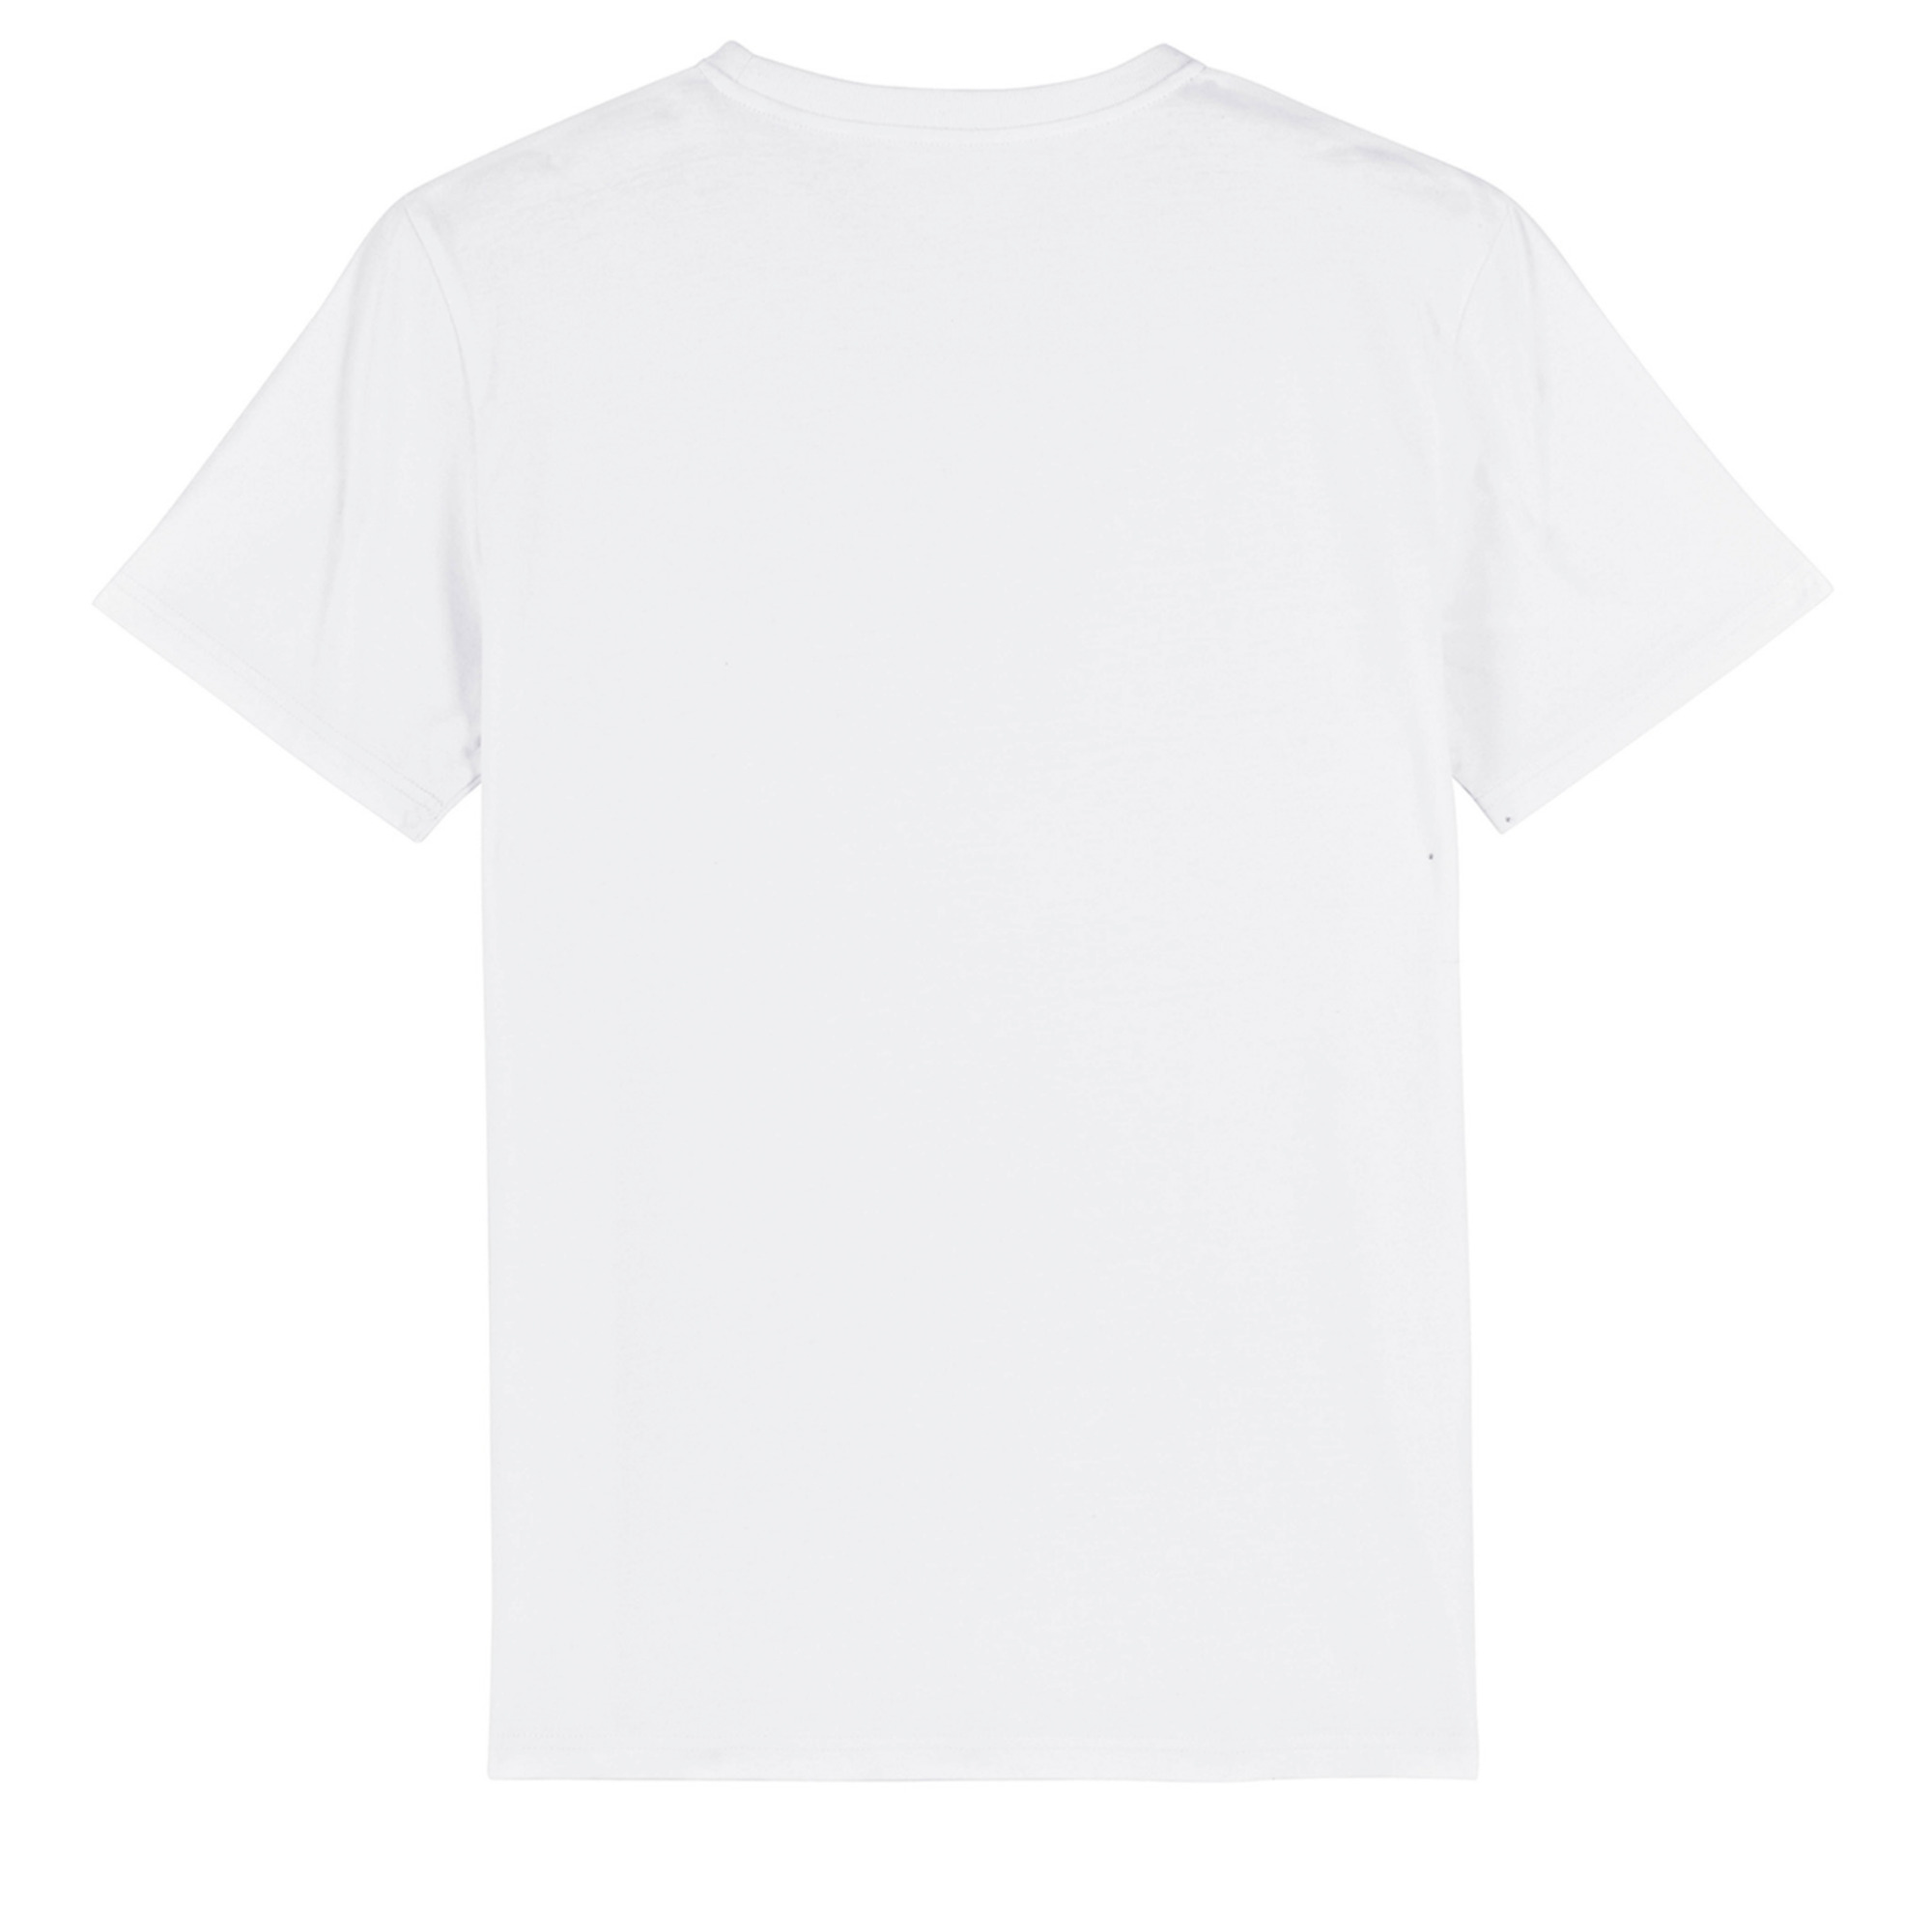 Find Your Voice Eco Tee (White)